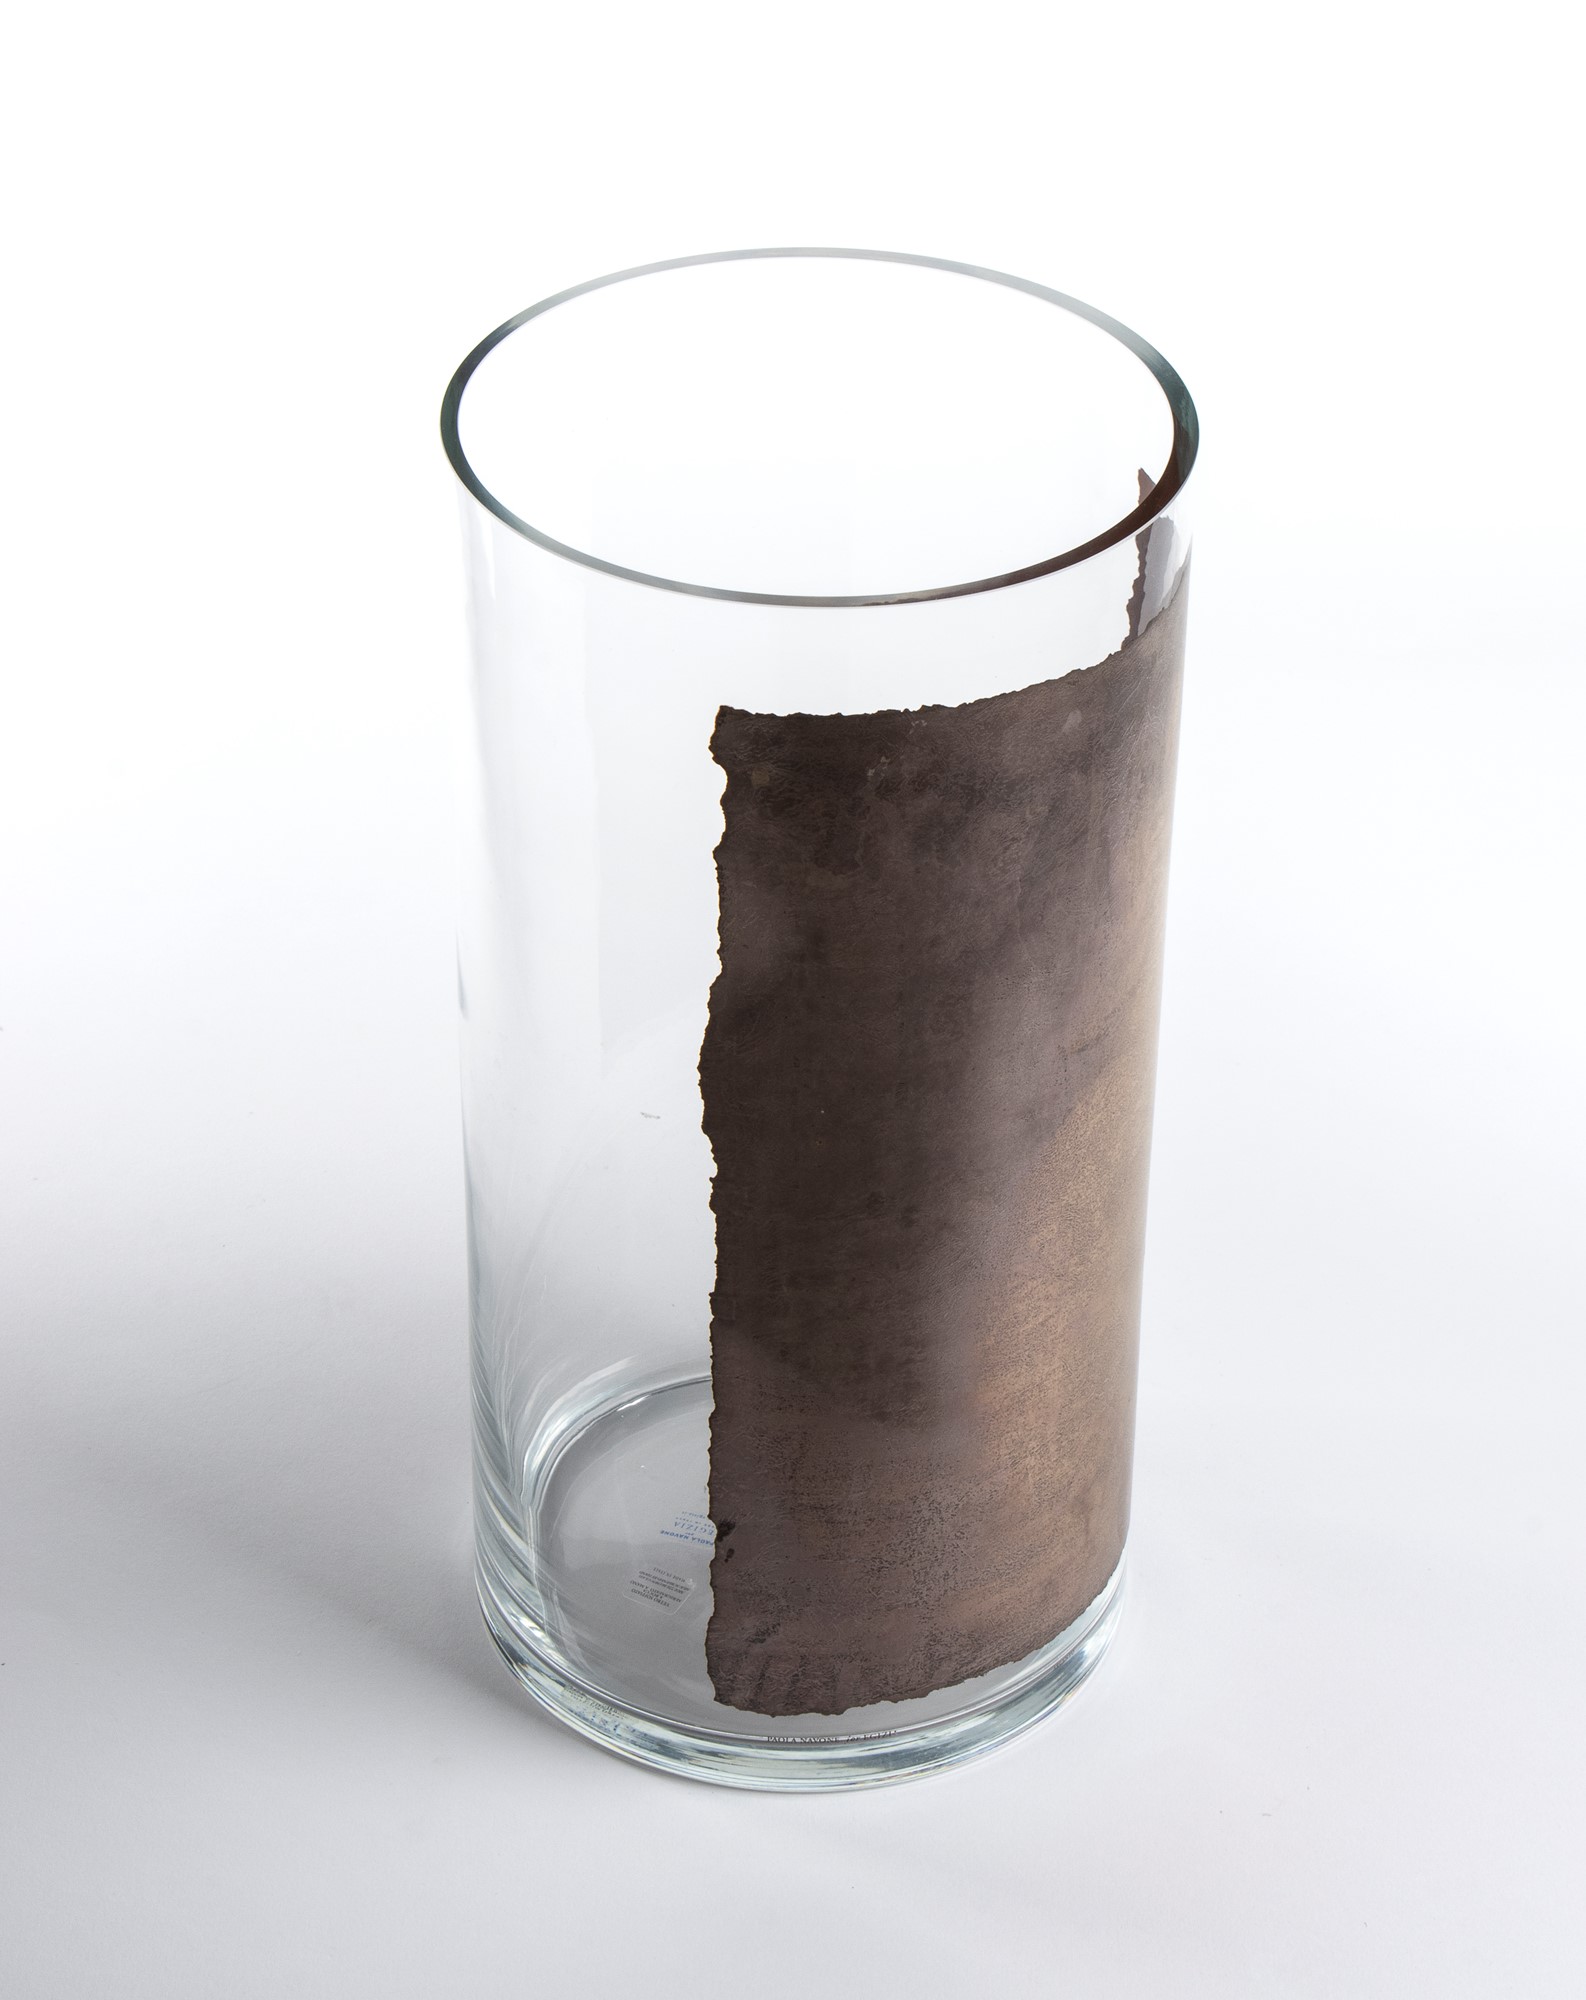 Paola Navone Glass vase hand blown and silk-screened glass and silver - Image 8 of 11